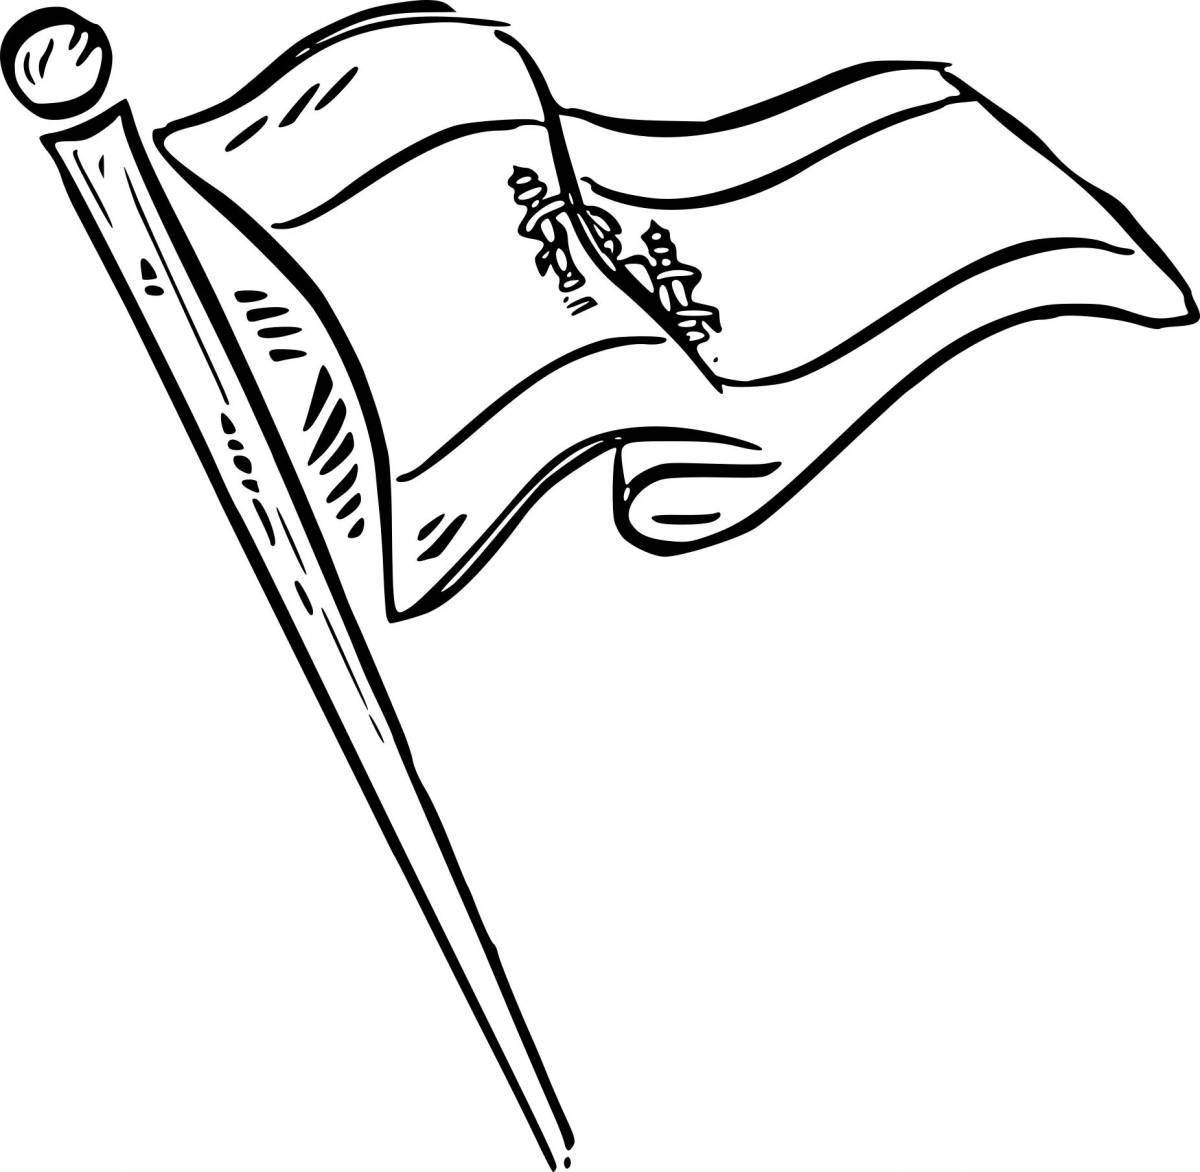 Glitter flag coloring page for kids